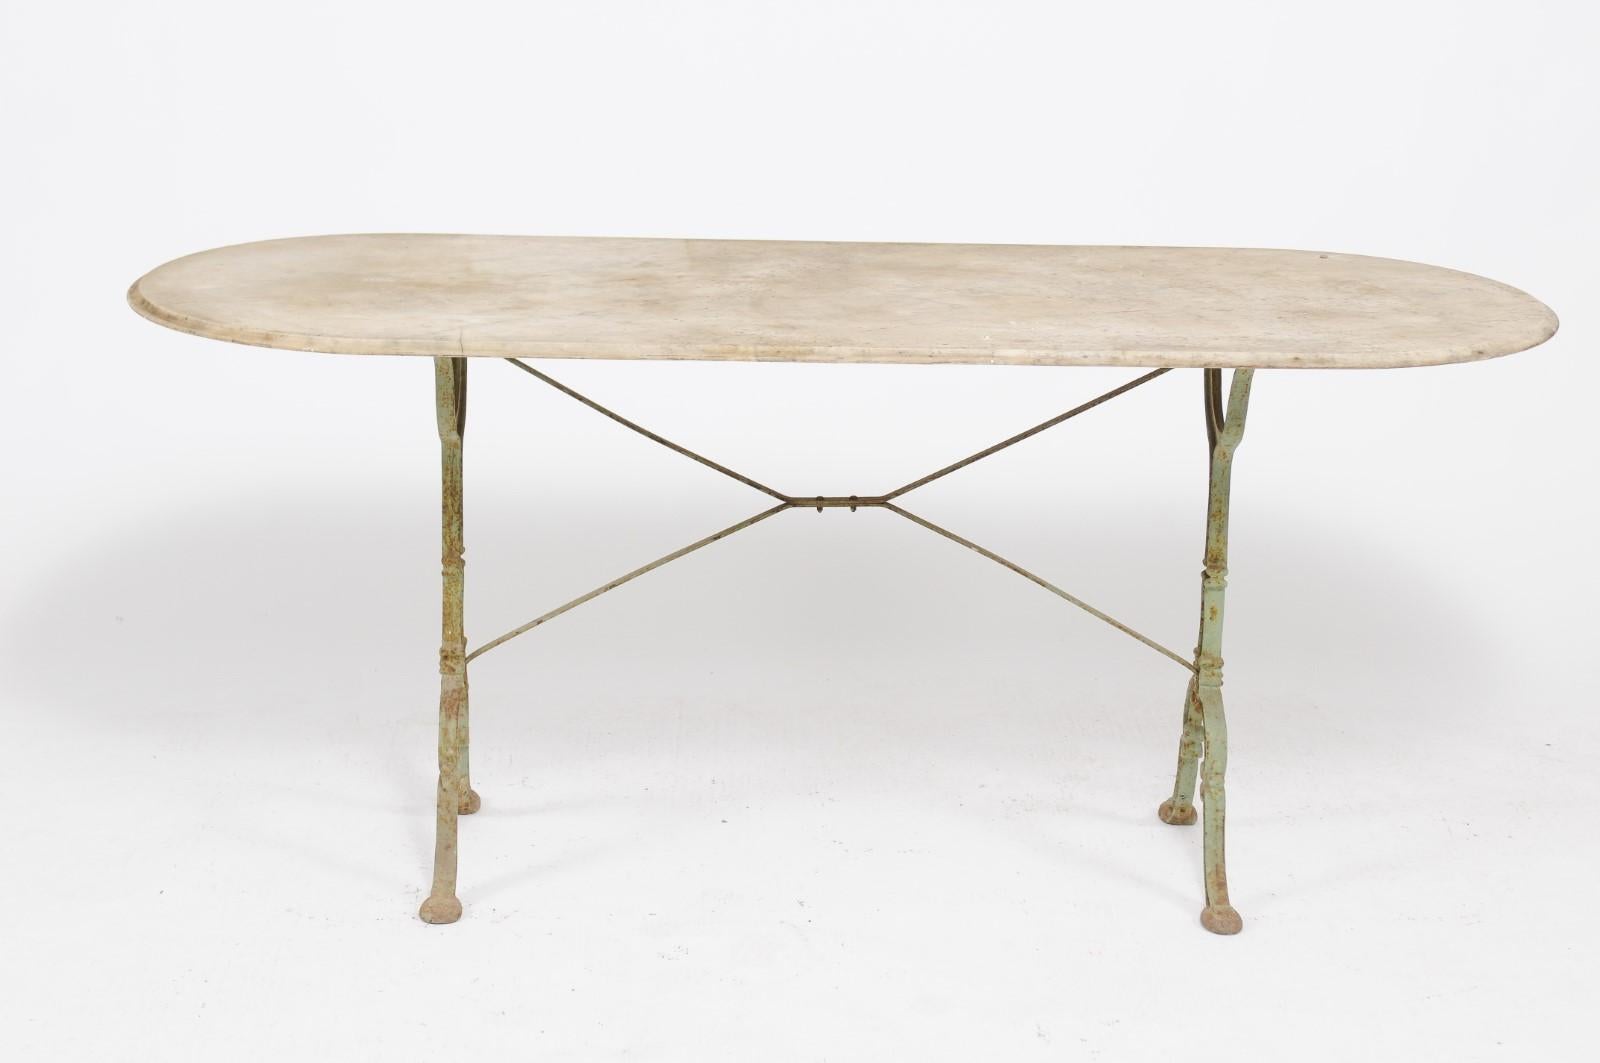 19th Century French Napoleon III Period Iron Bistro Table with Oval Marble Top, circa 1850